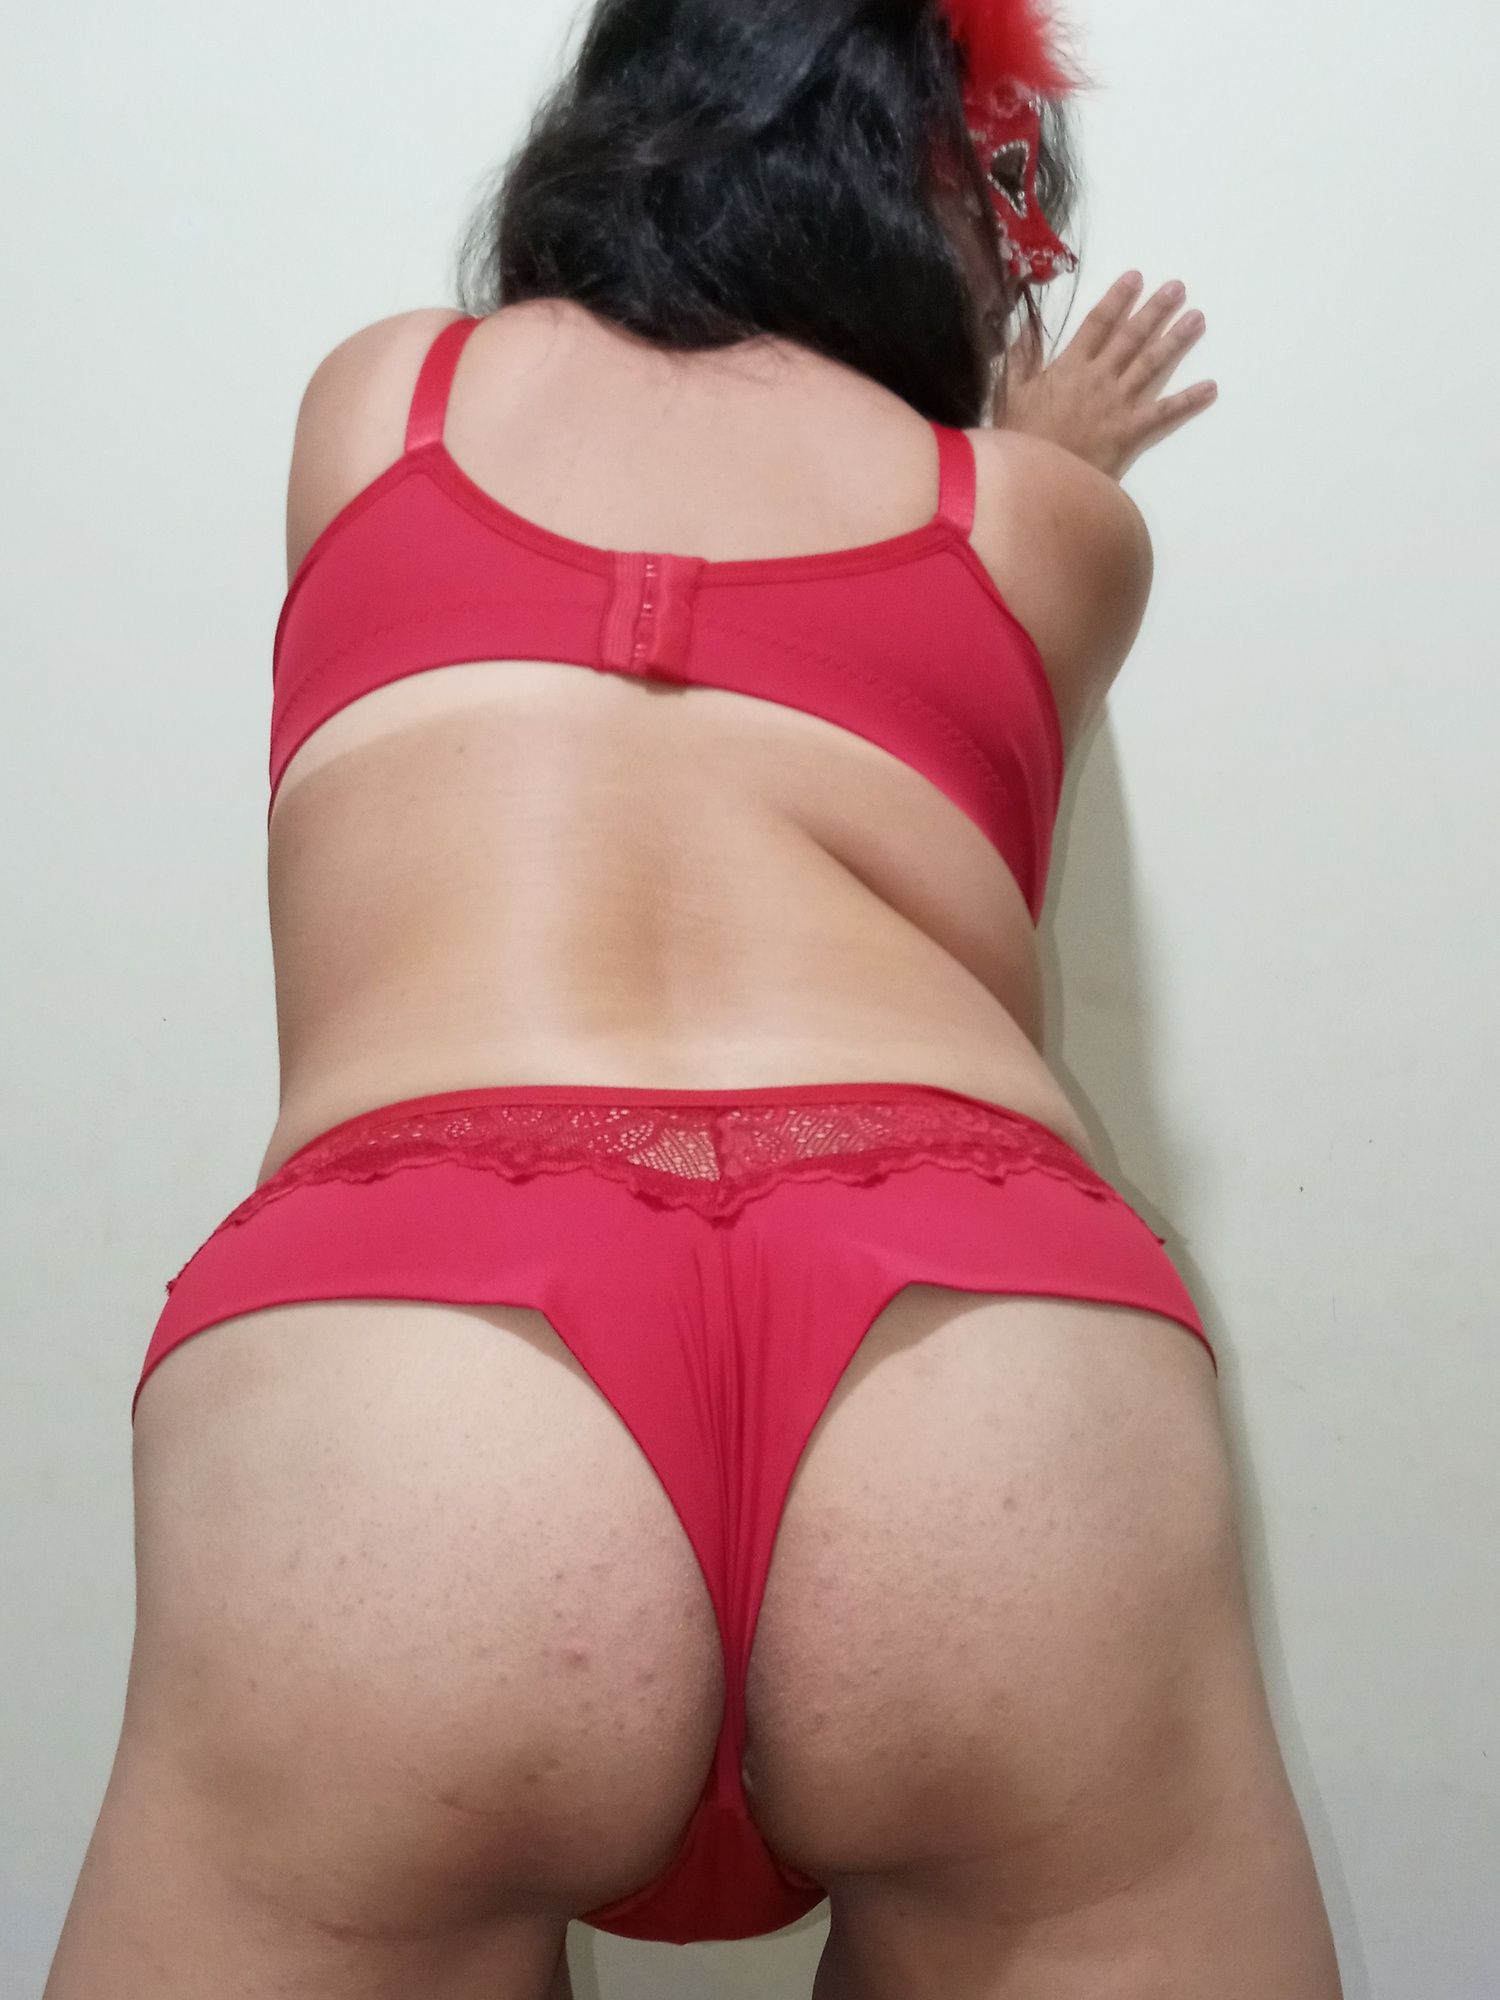 SHOWING OFF WEARING RED LINGERIE... #4